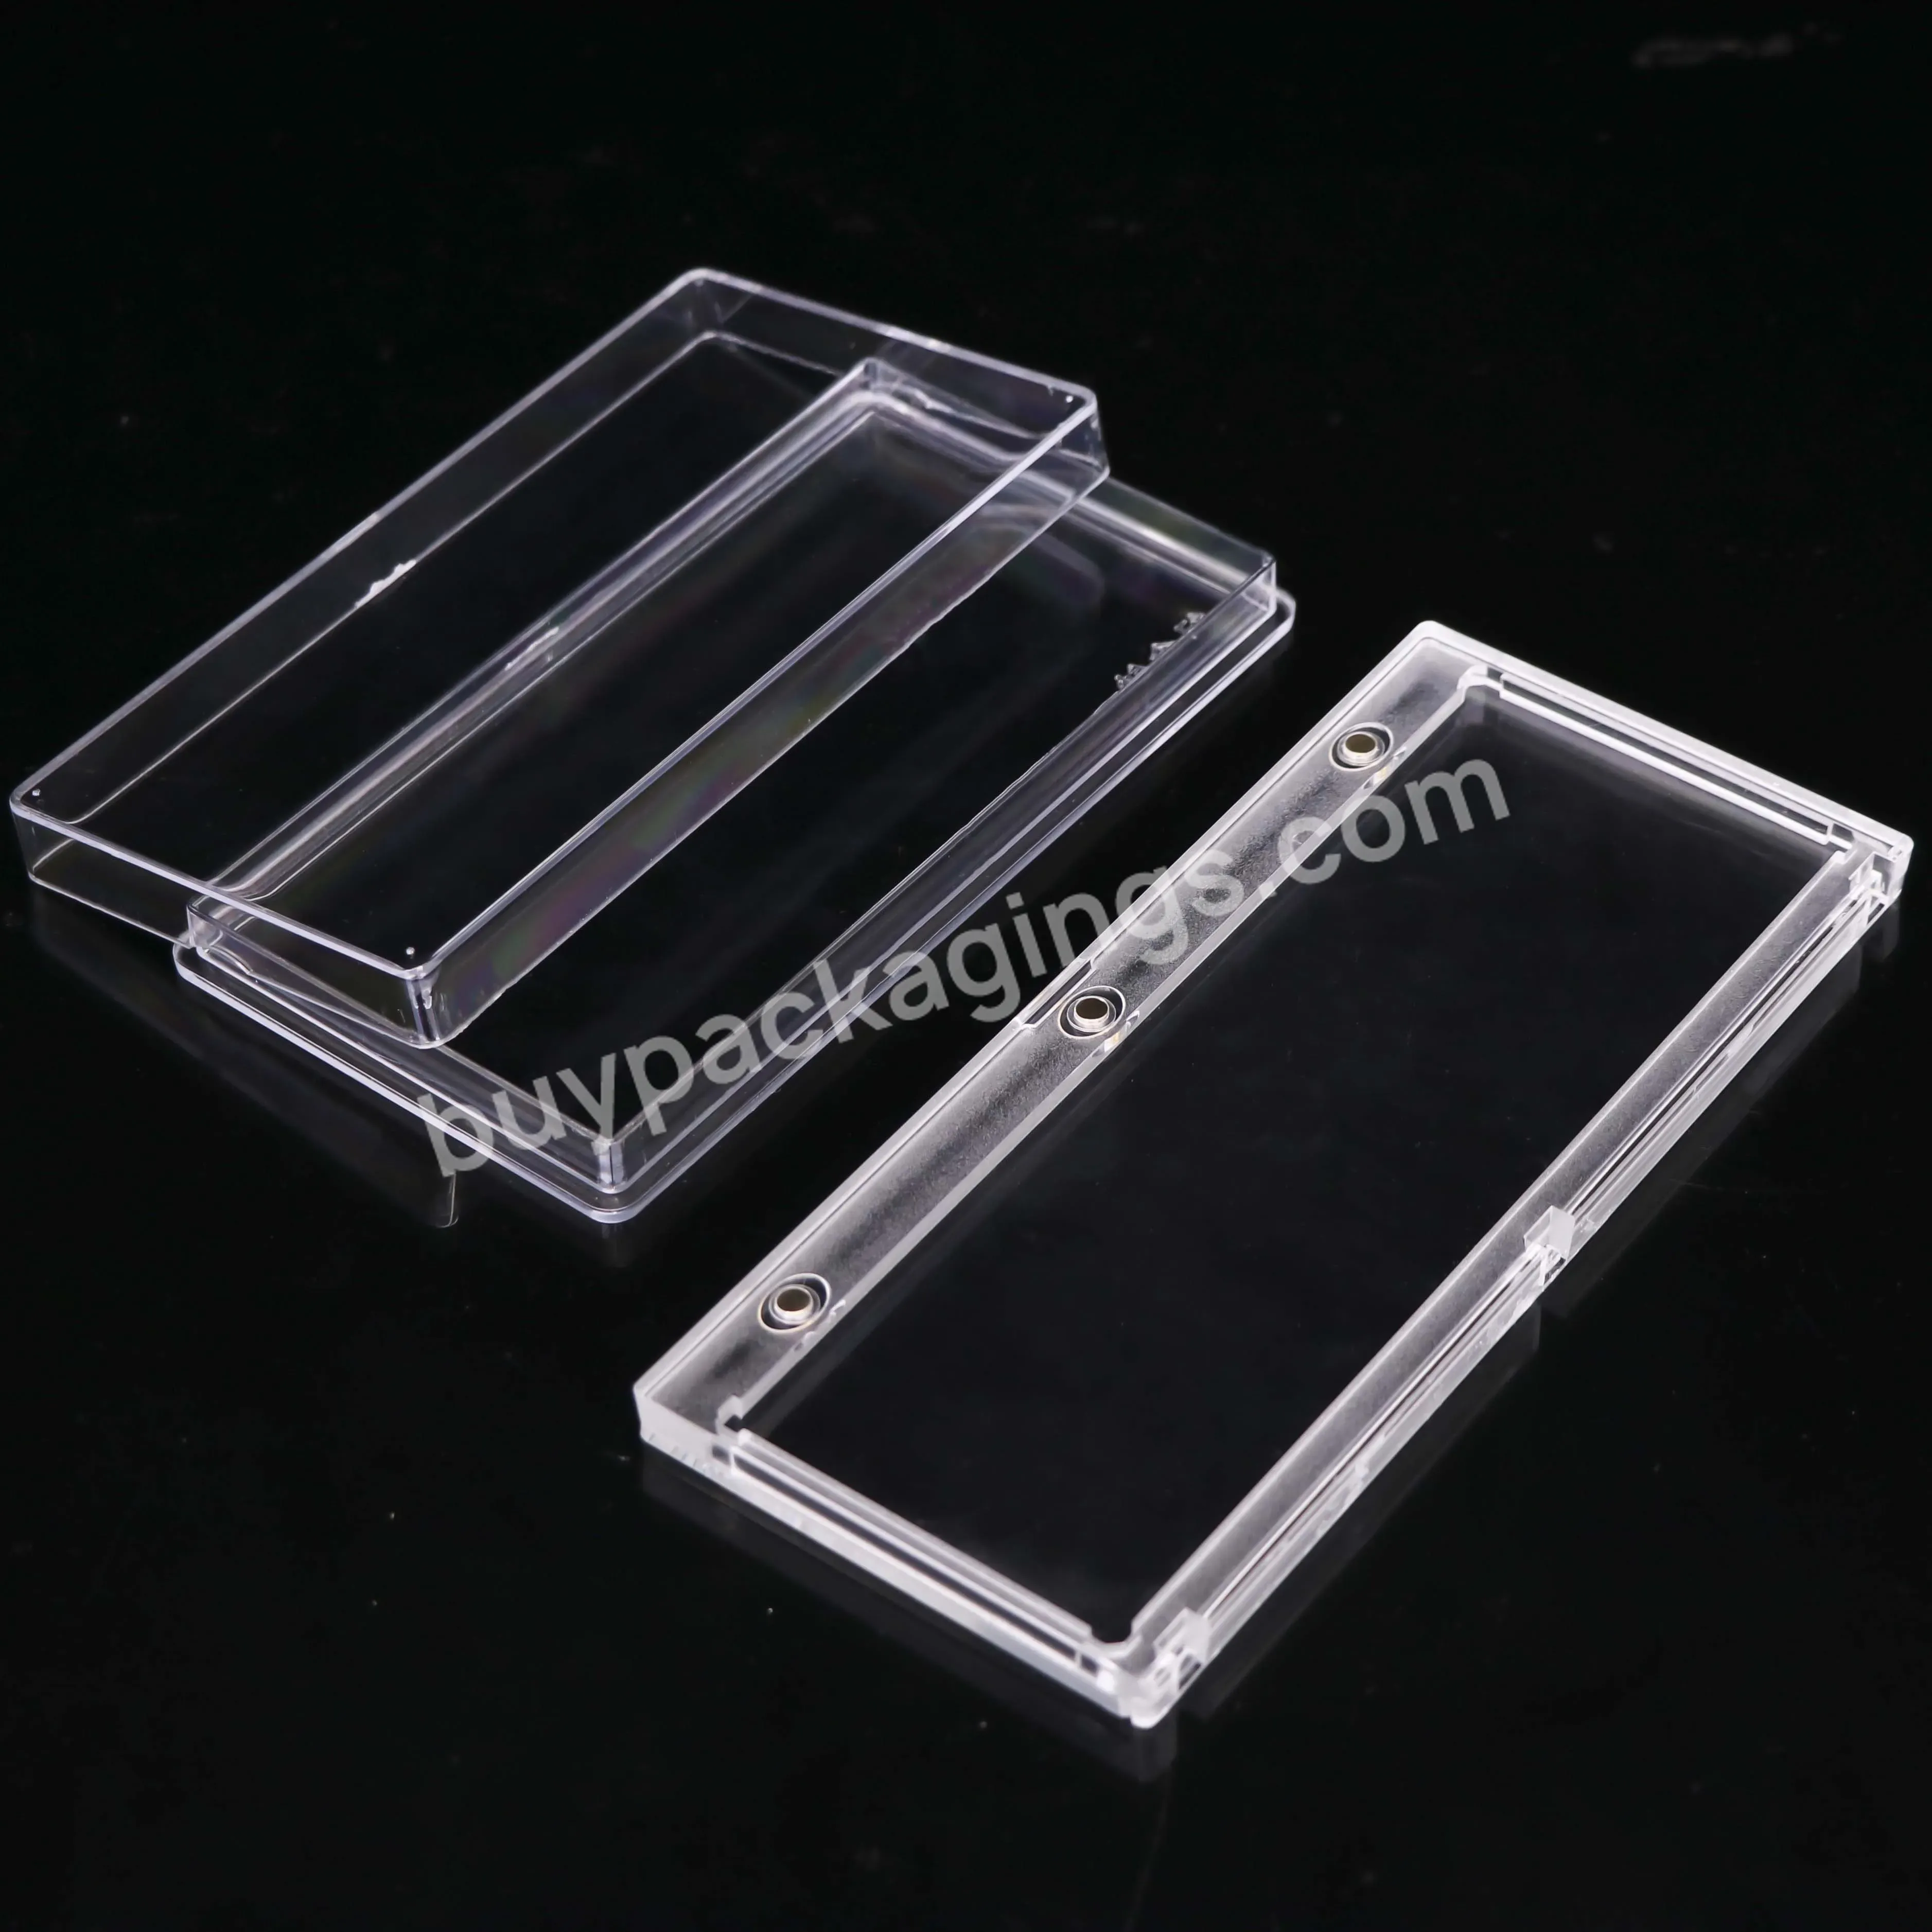 Acrylic Currency Display Holder Acrylic Bill Holder Banknotes Sleeves Bill Toploader Comic Toploaders Wholesale - Buy Comic Toploaders,Banknotes Sleeves,Acrylic Bill Holder.